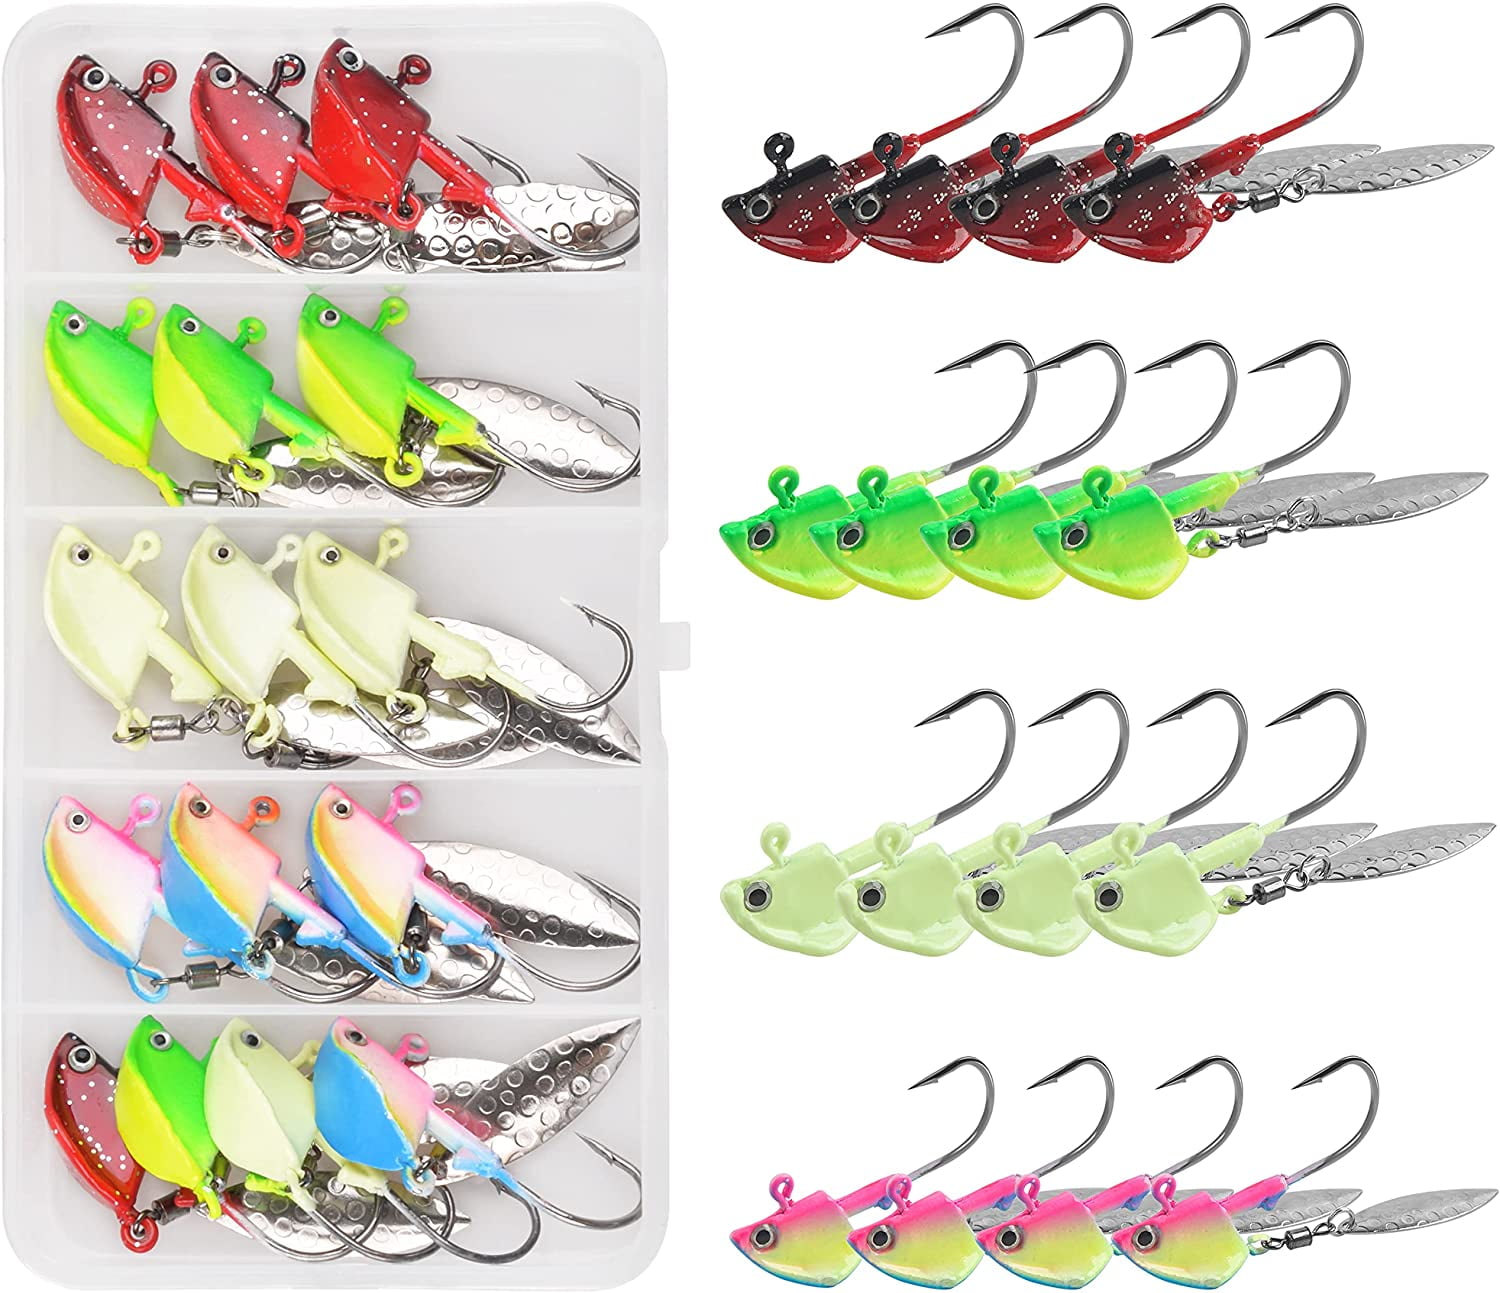 Fishing Jig Head Hook with Willow Blade, 16pcs Swimbaits Weighted Spin Head  Jig with Spinner for Bass Fishing 1/4oz 3/8oz 1/2oz 